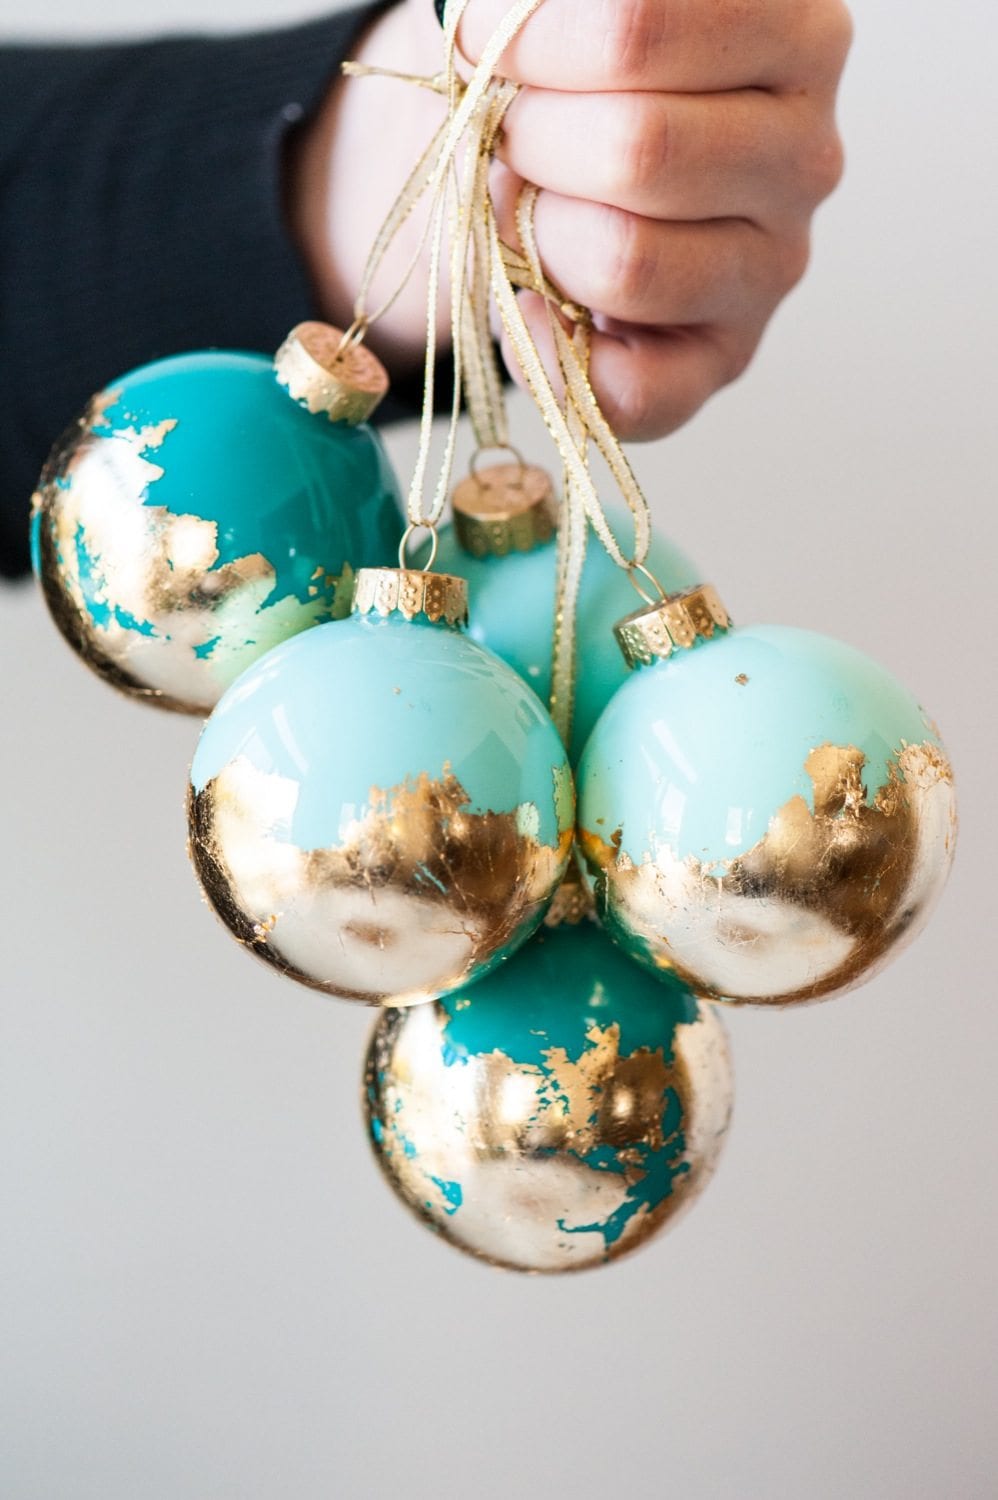 DIY Painted Gold Leaf Ornaments by entertaining blog @cydconverse | How to decorate glas ornaments 